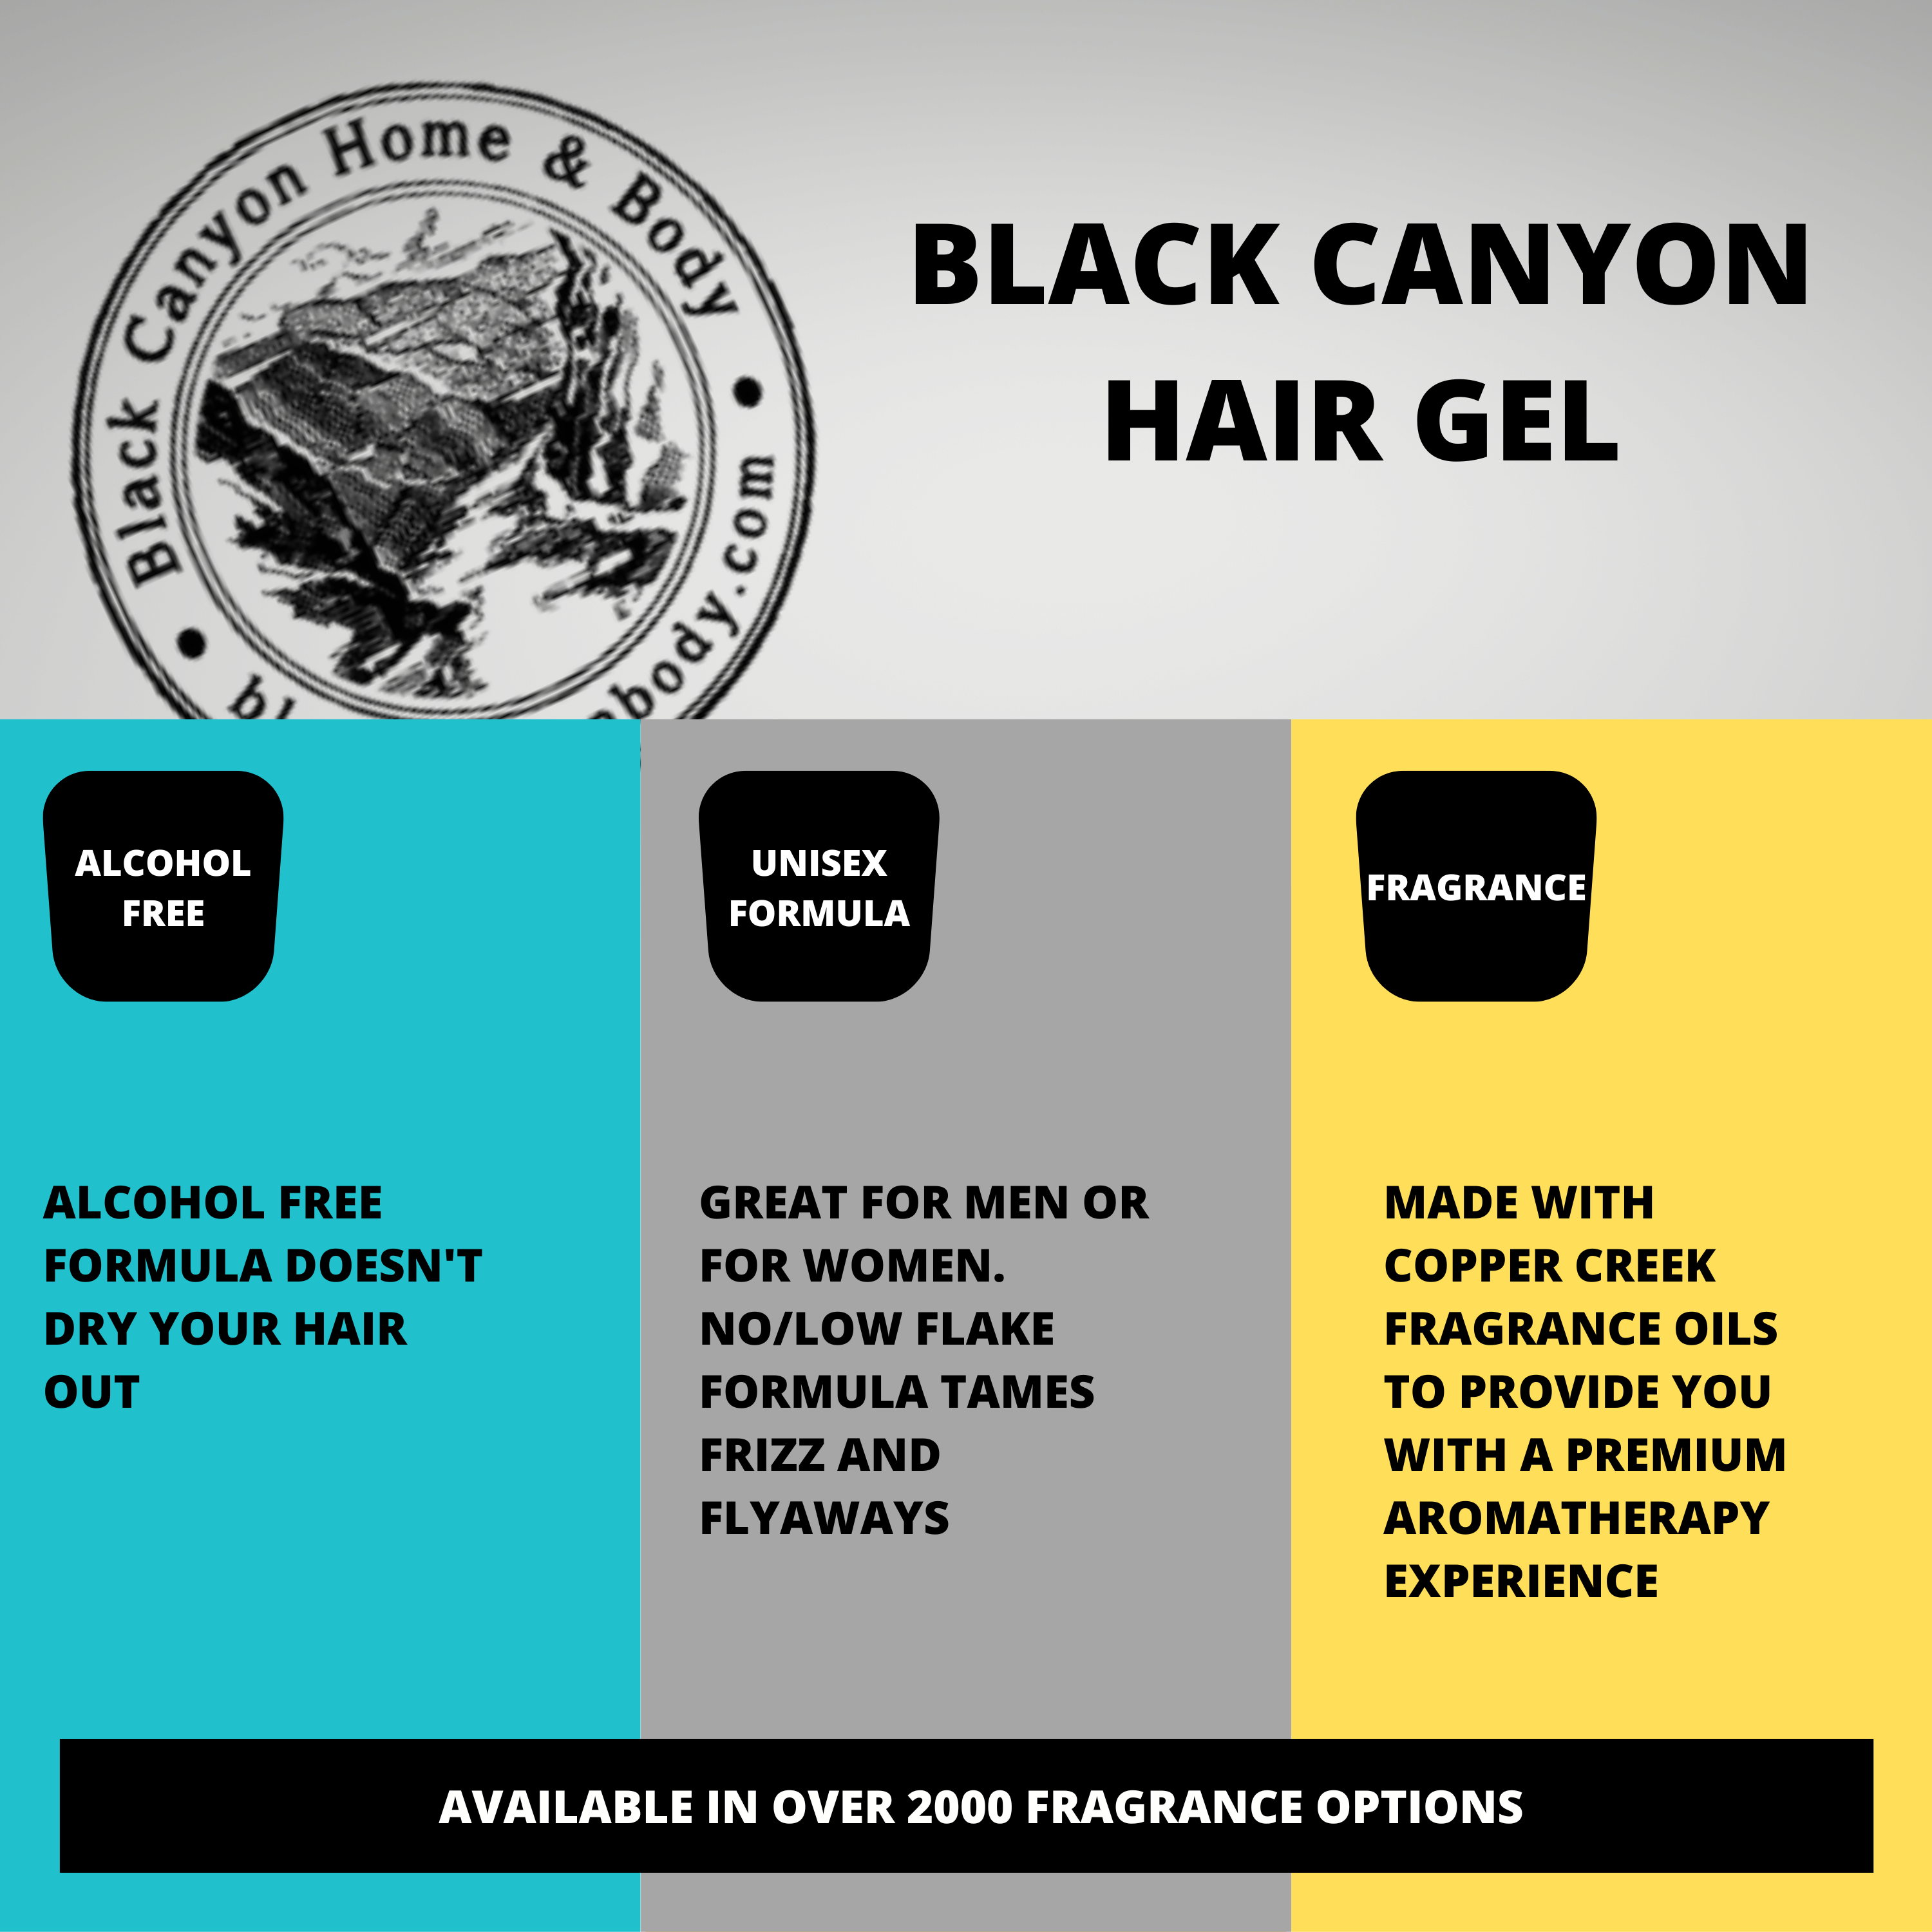 Black Canyon East Asian Spice Scented Hair Gel